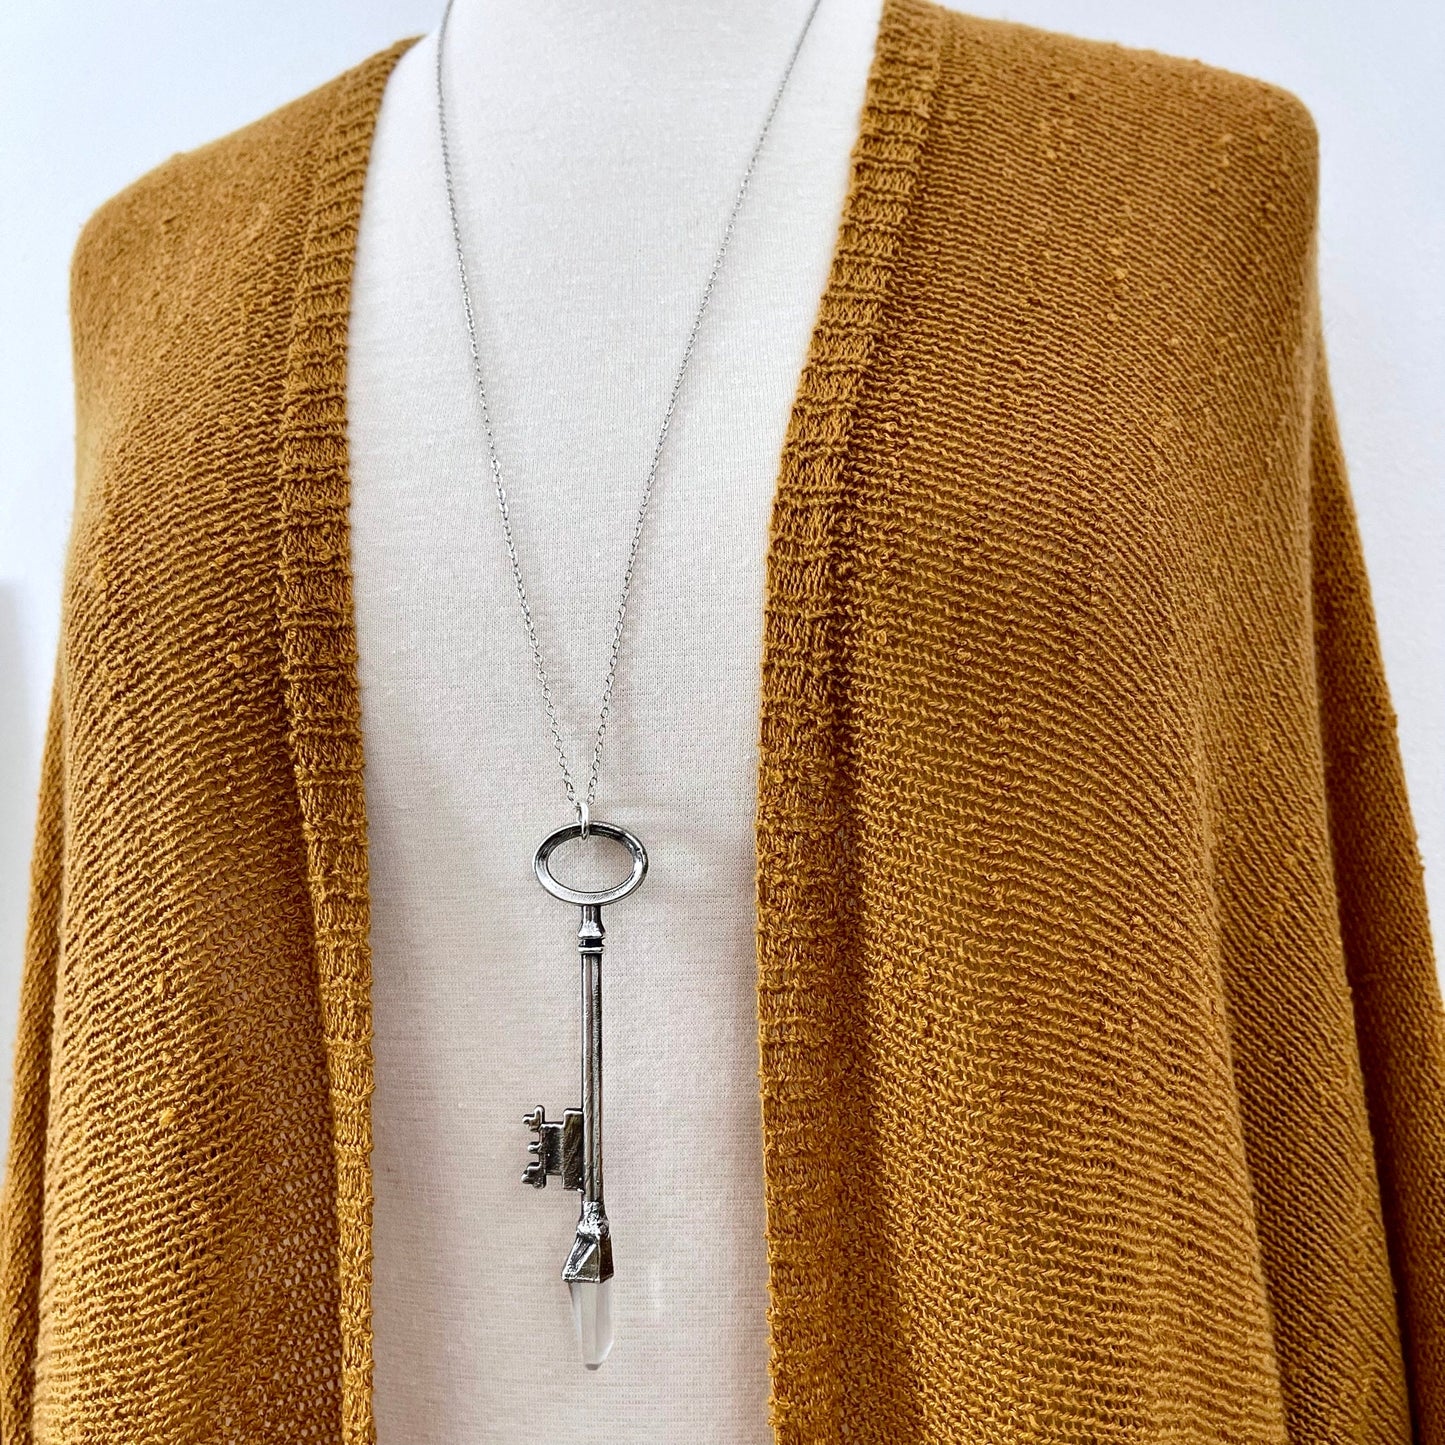 antique key necklace, Crystal Necklaces, Etsy ID: 1352918214, FOXLARK- NECKLACES, Gothic Jewelry, Jewelry, Necklaces, Raw Amethyst Jewelry, raw crystal jewelry, Raw crystal necklace, Raw Crystal Pendant, Raw Stone Jewelry, Skeleton Key, Steampunk Jewelry,